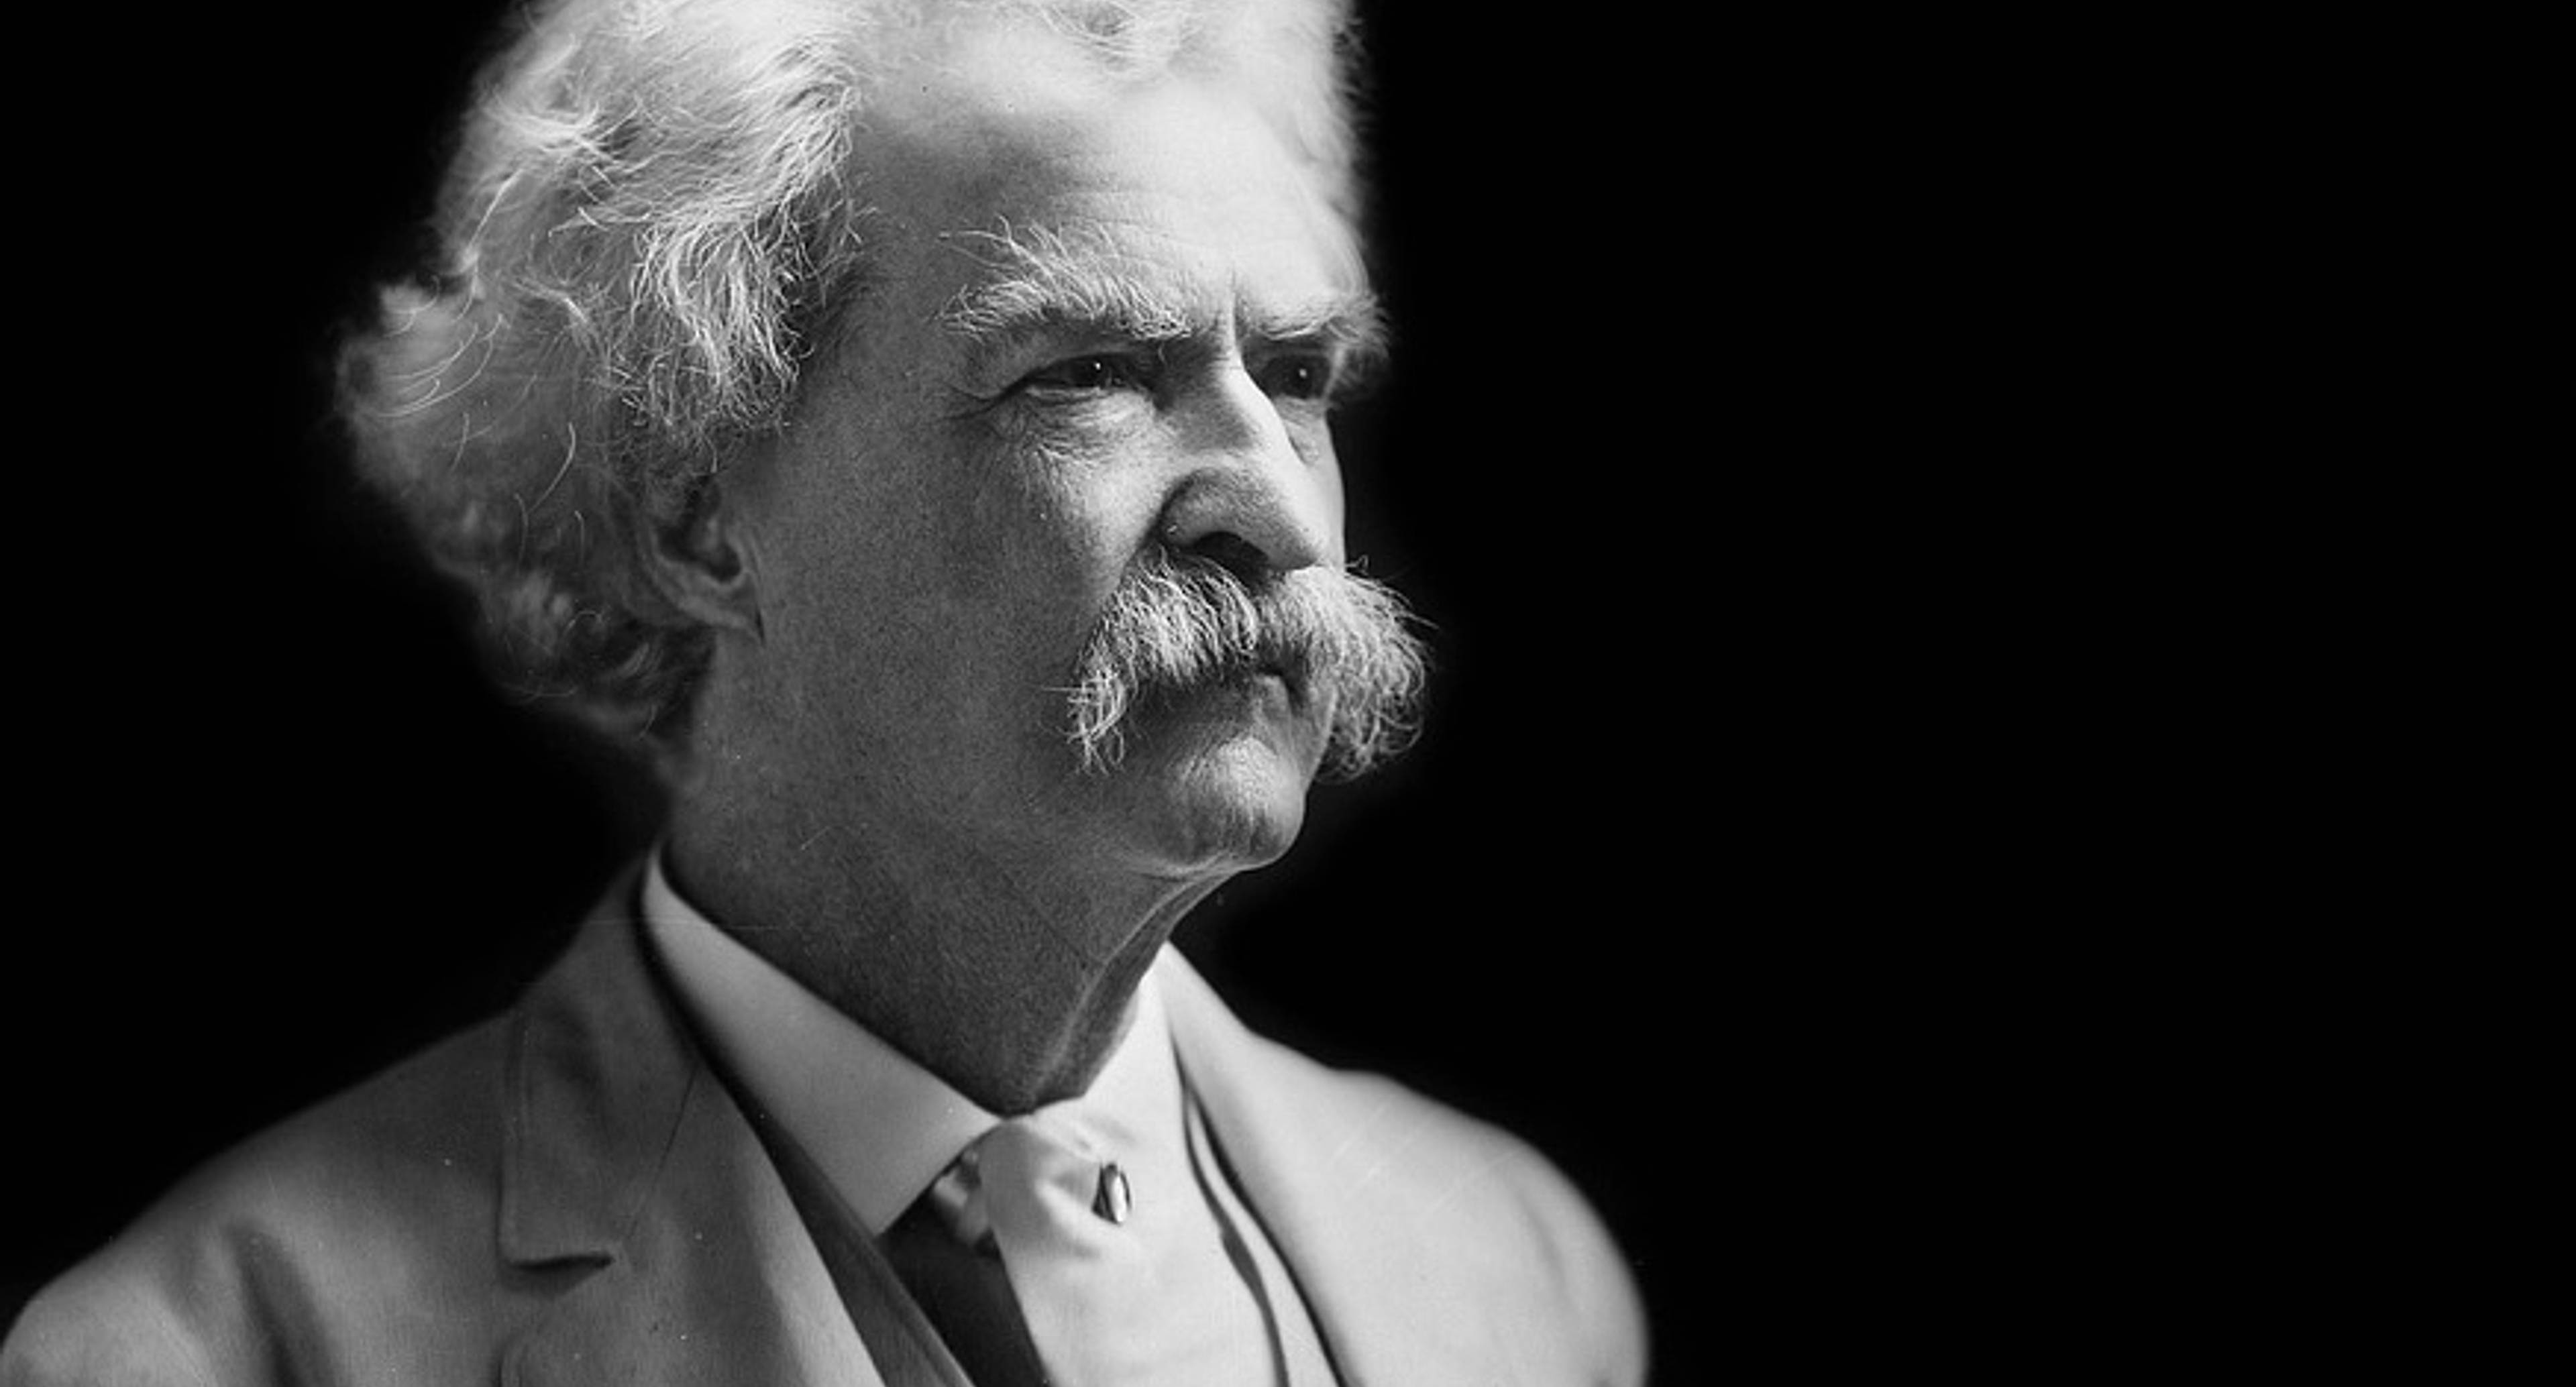 Mark Twain's Story of Life and Works